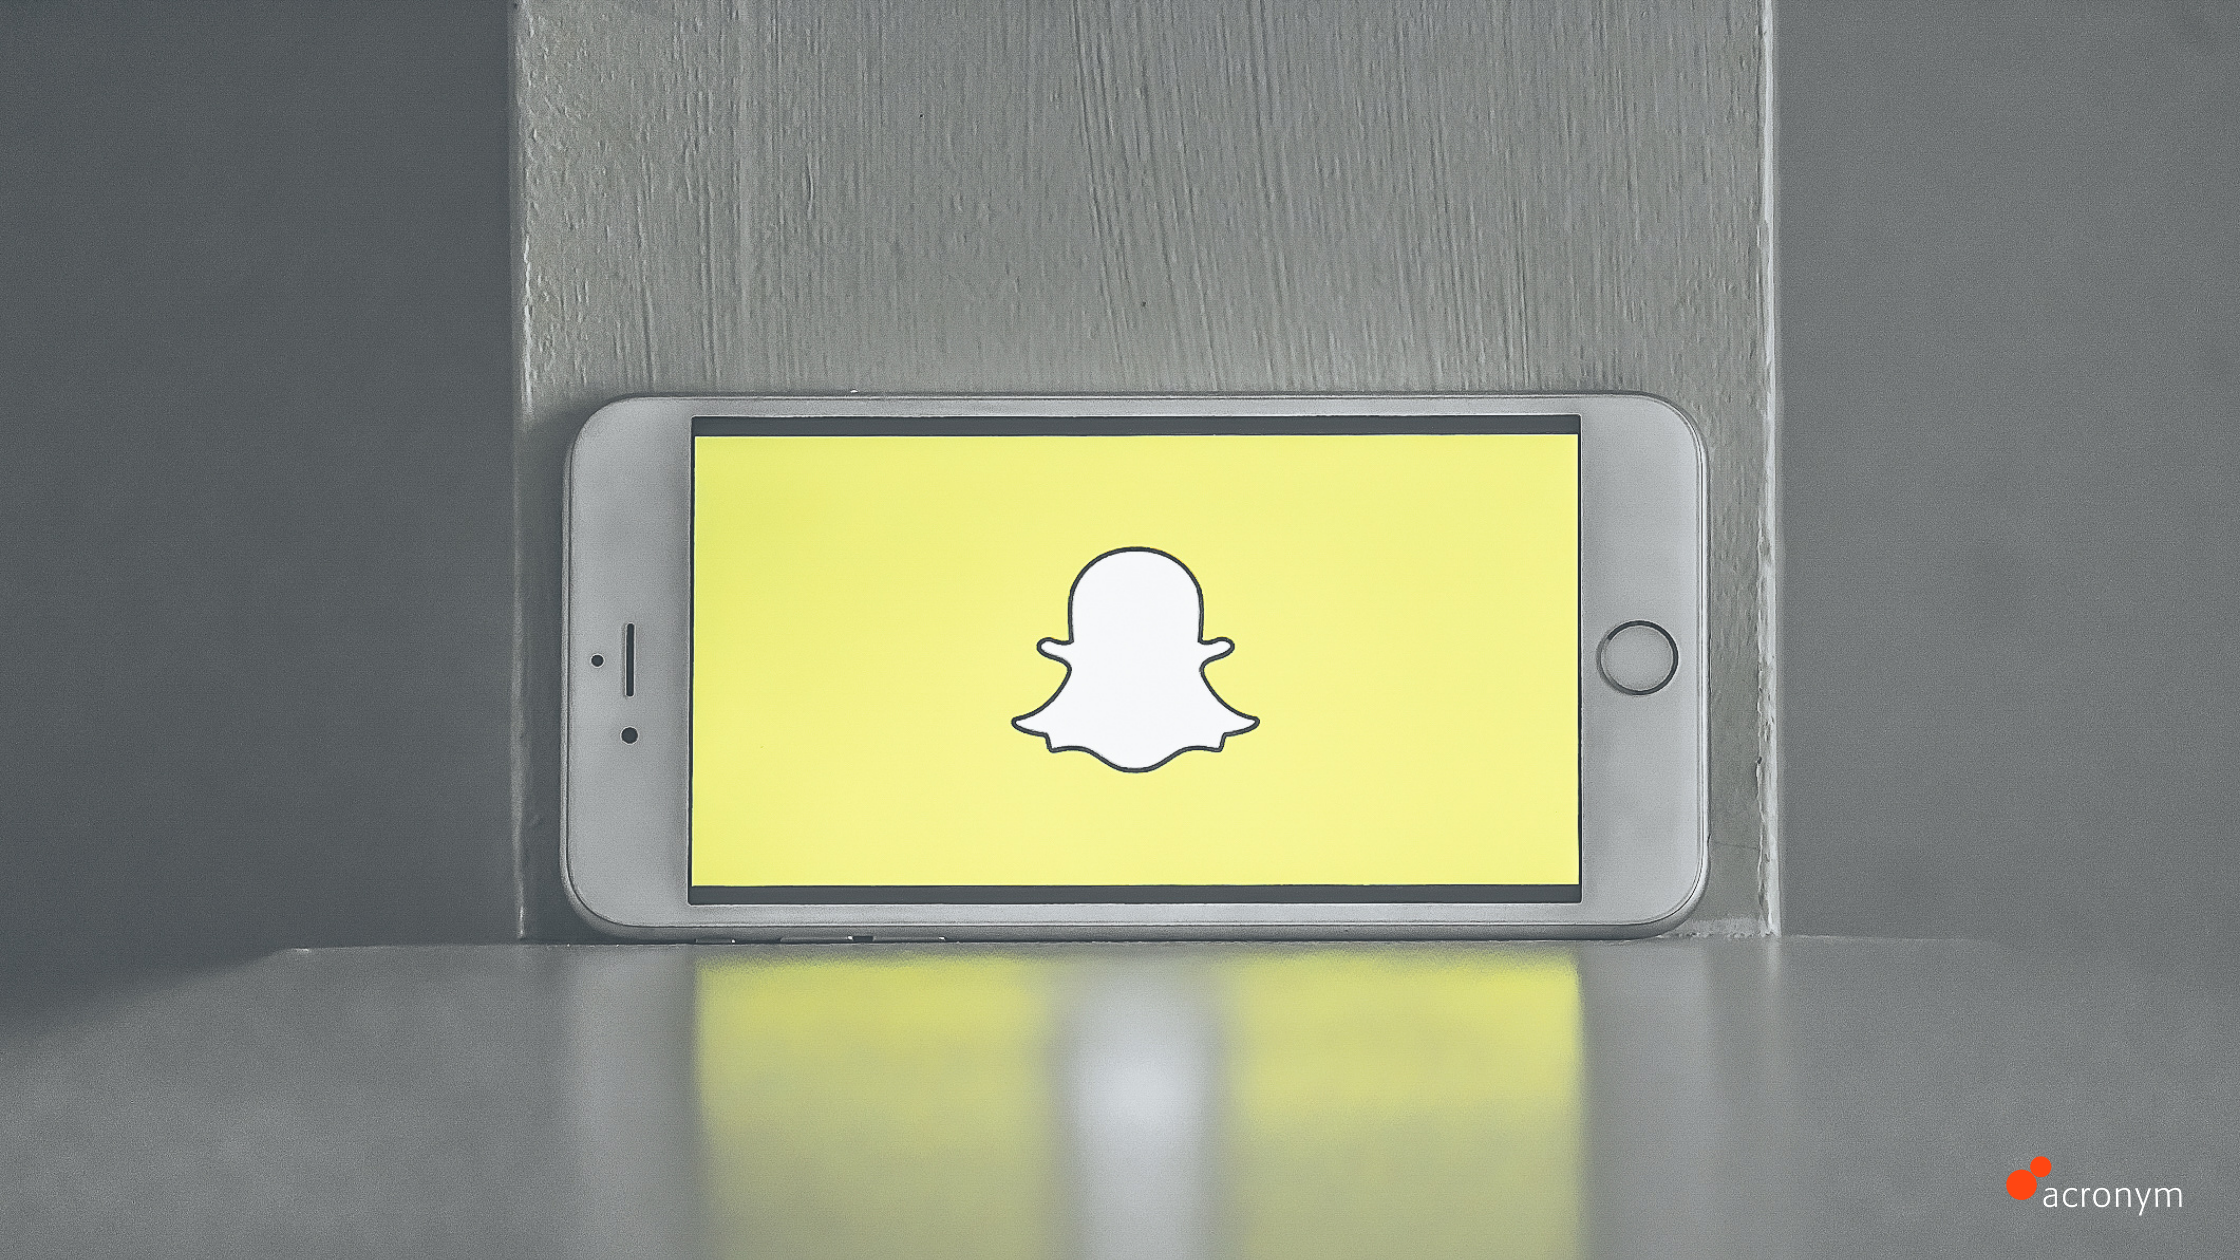 What You Should Know About Snapchat Brand Profiles